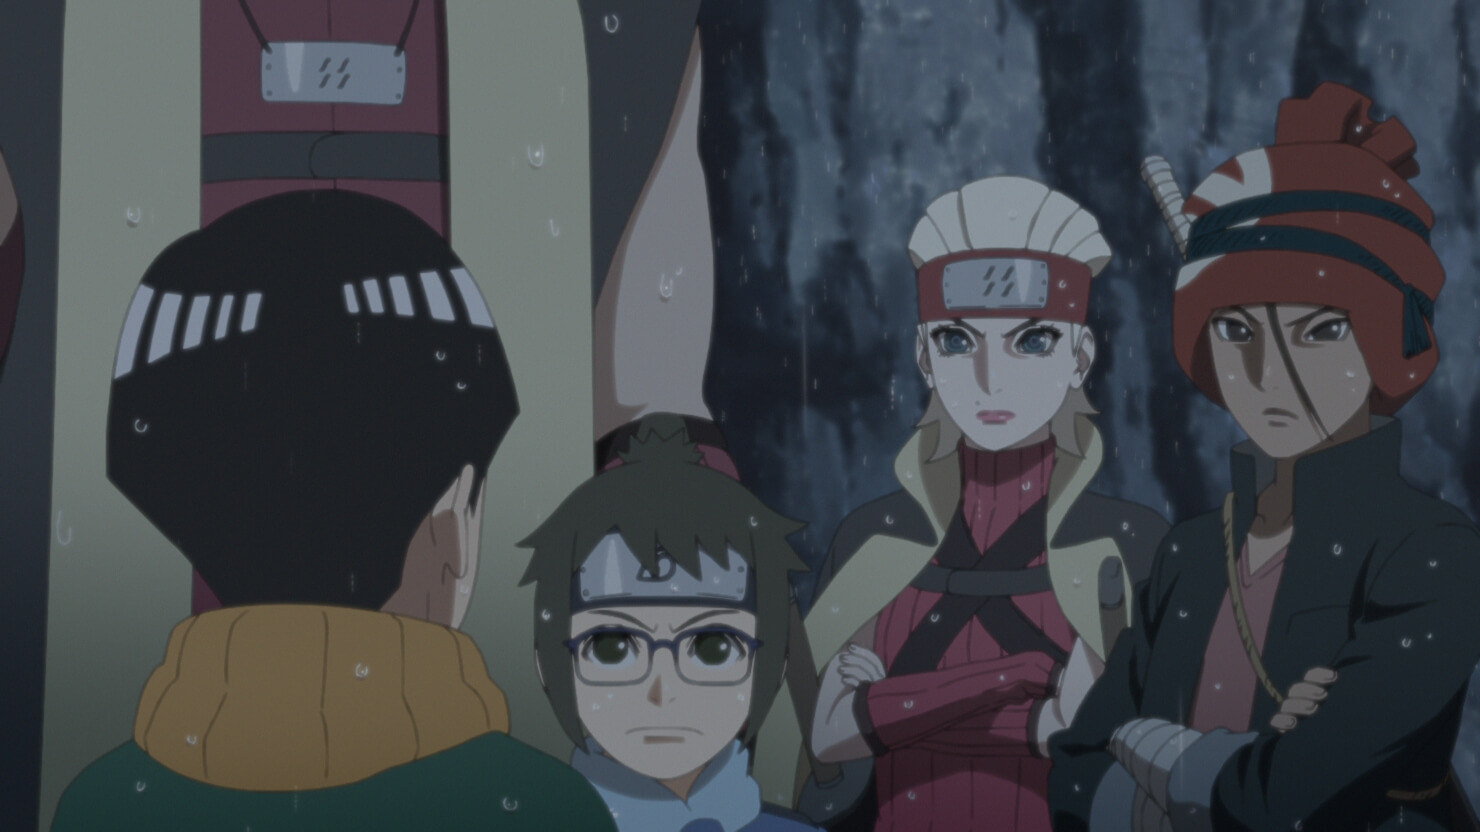 boruto face to face w ikada in the preview for ep 253. those last